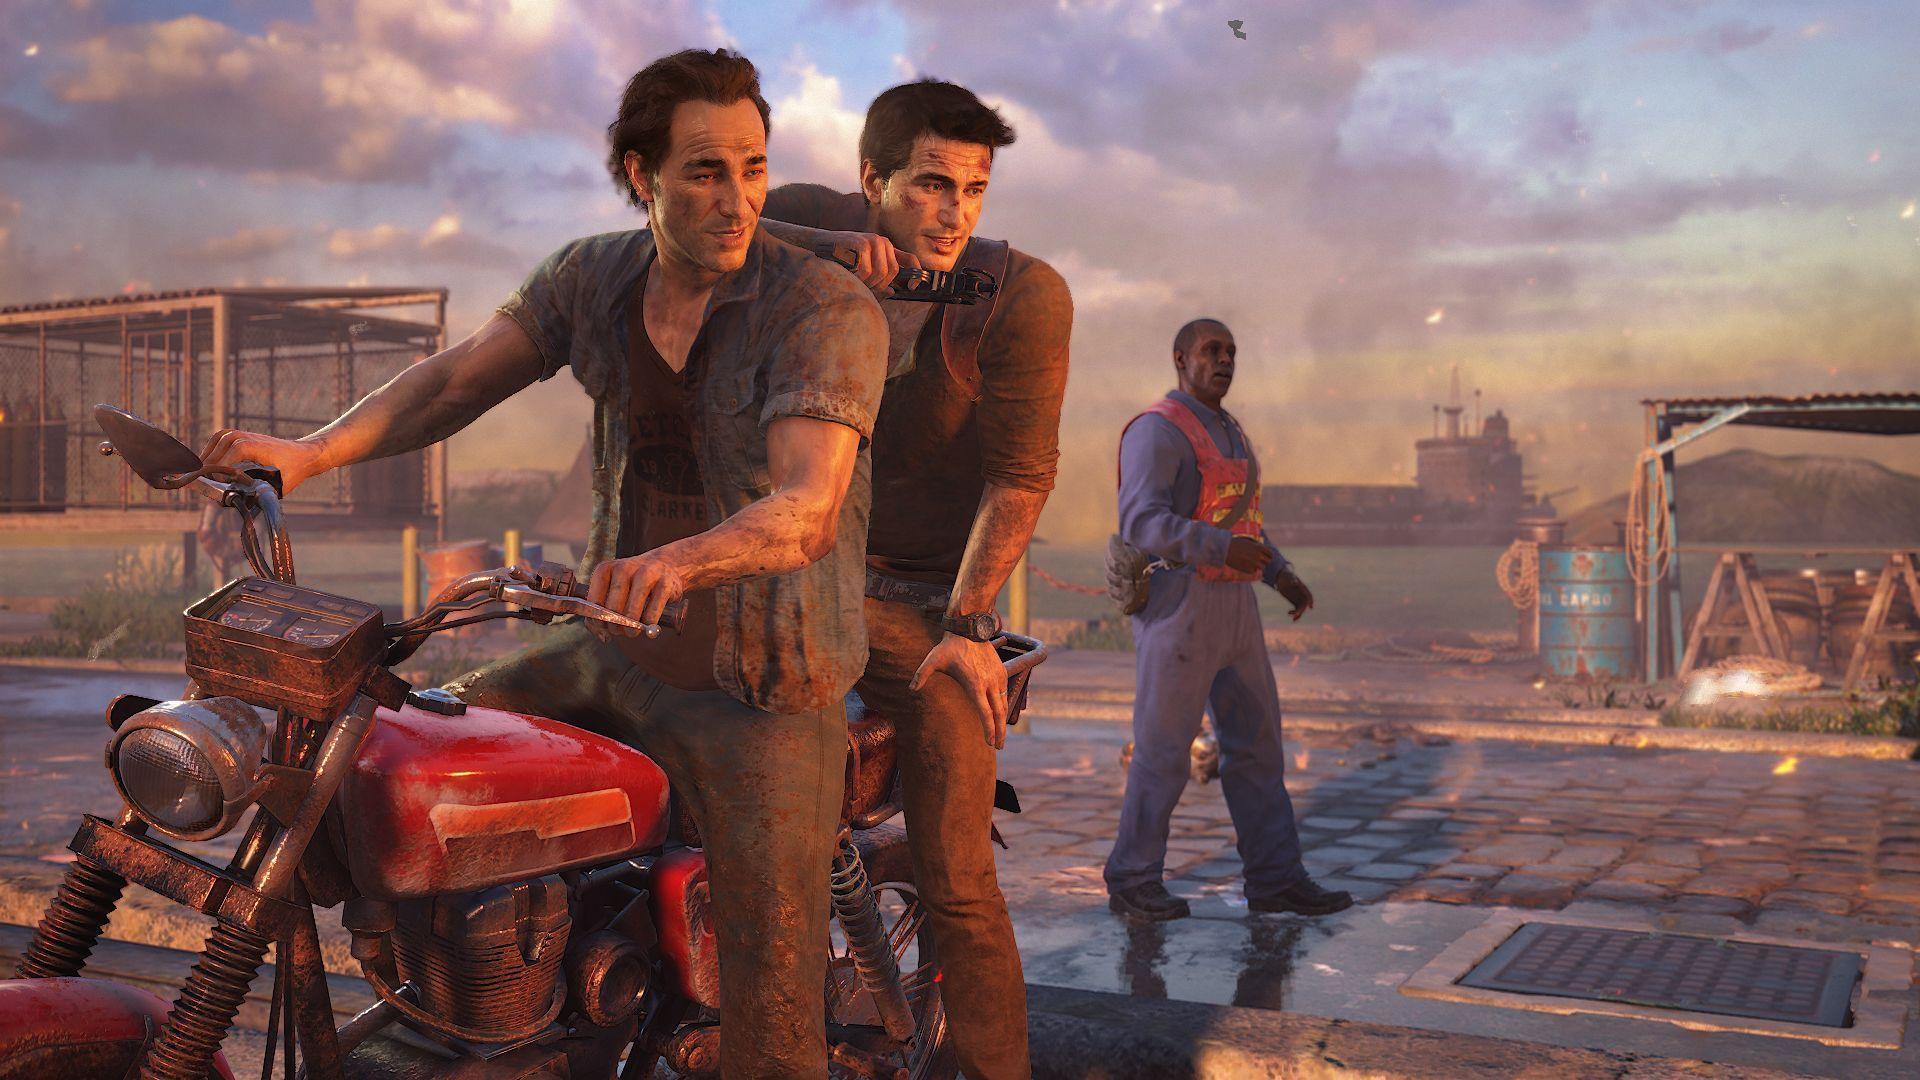 Uncharted 4: A Thief&;s End HD Wallpaper and screens download free